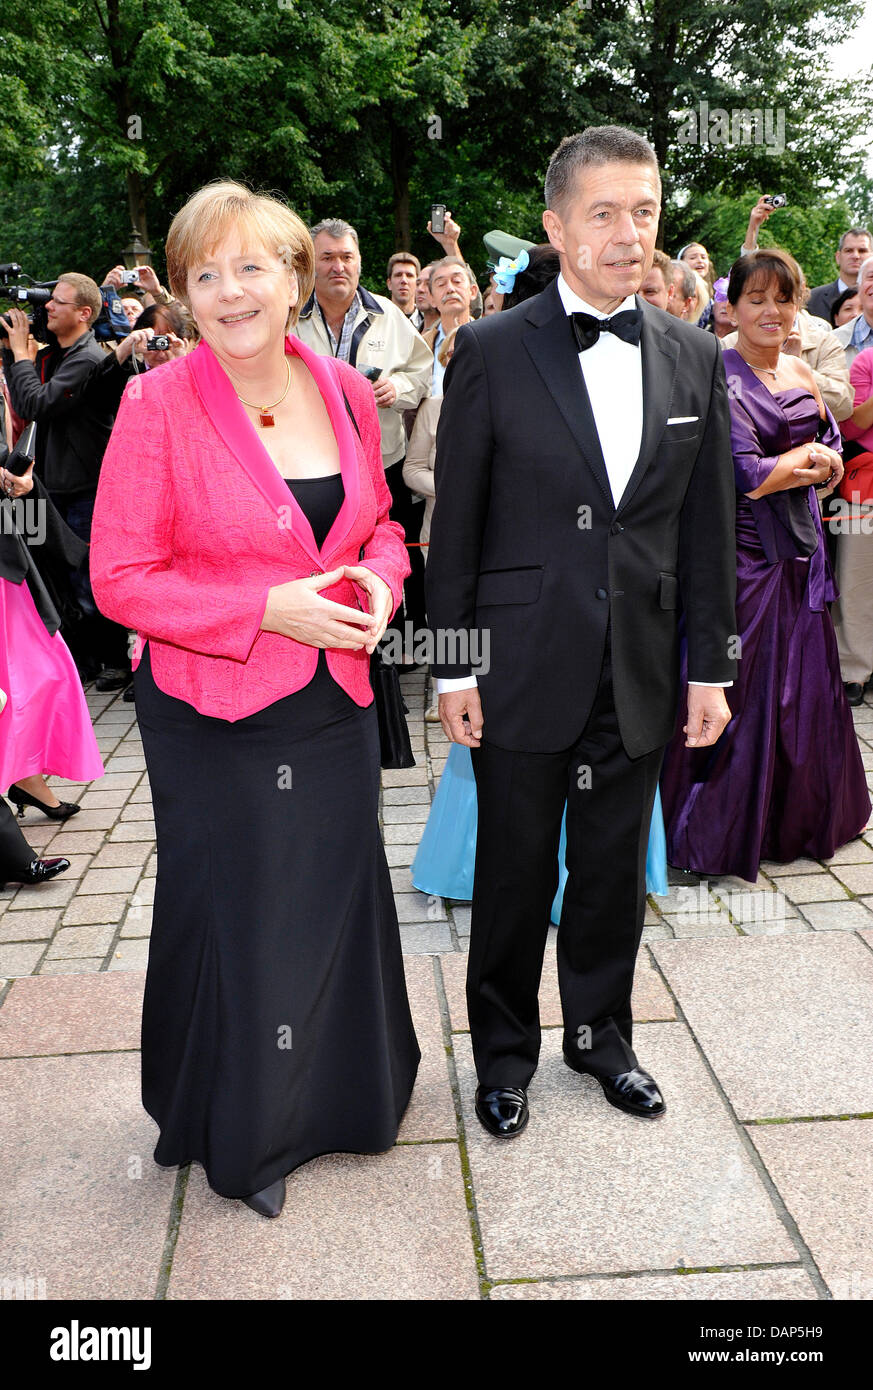 German Chancellor Angela Merkel (CDU) and her husband Joachim Sauer leave the theater during the break at the opening of the Bayreuth Festival 2011 in Bayreuth, Germany, 25 July 2011. The 100th festival opens with the opera 'Tannhaeuser'. The one-month festival is Germany's most prestigious culture event and devoted to operas by Richard Wagner. Photo: Ursula Düren dpa/lby Stock Photo